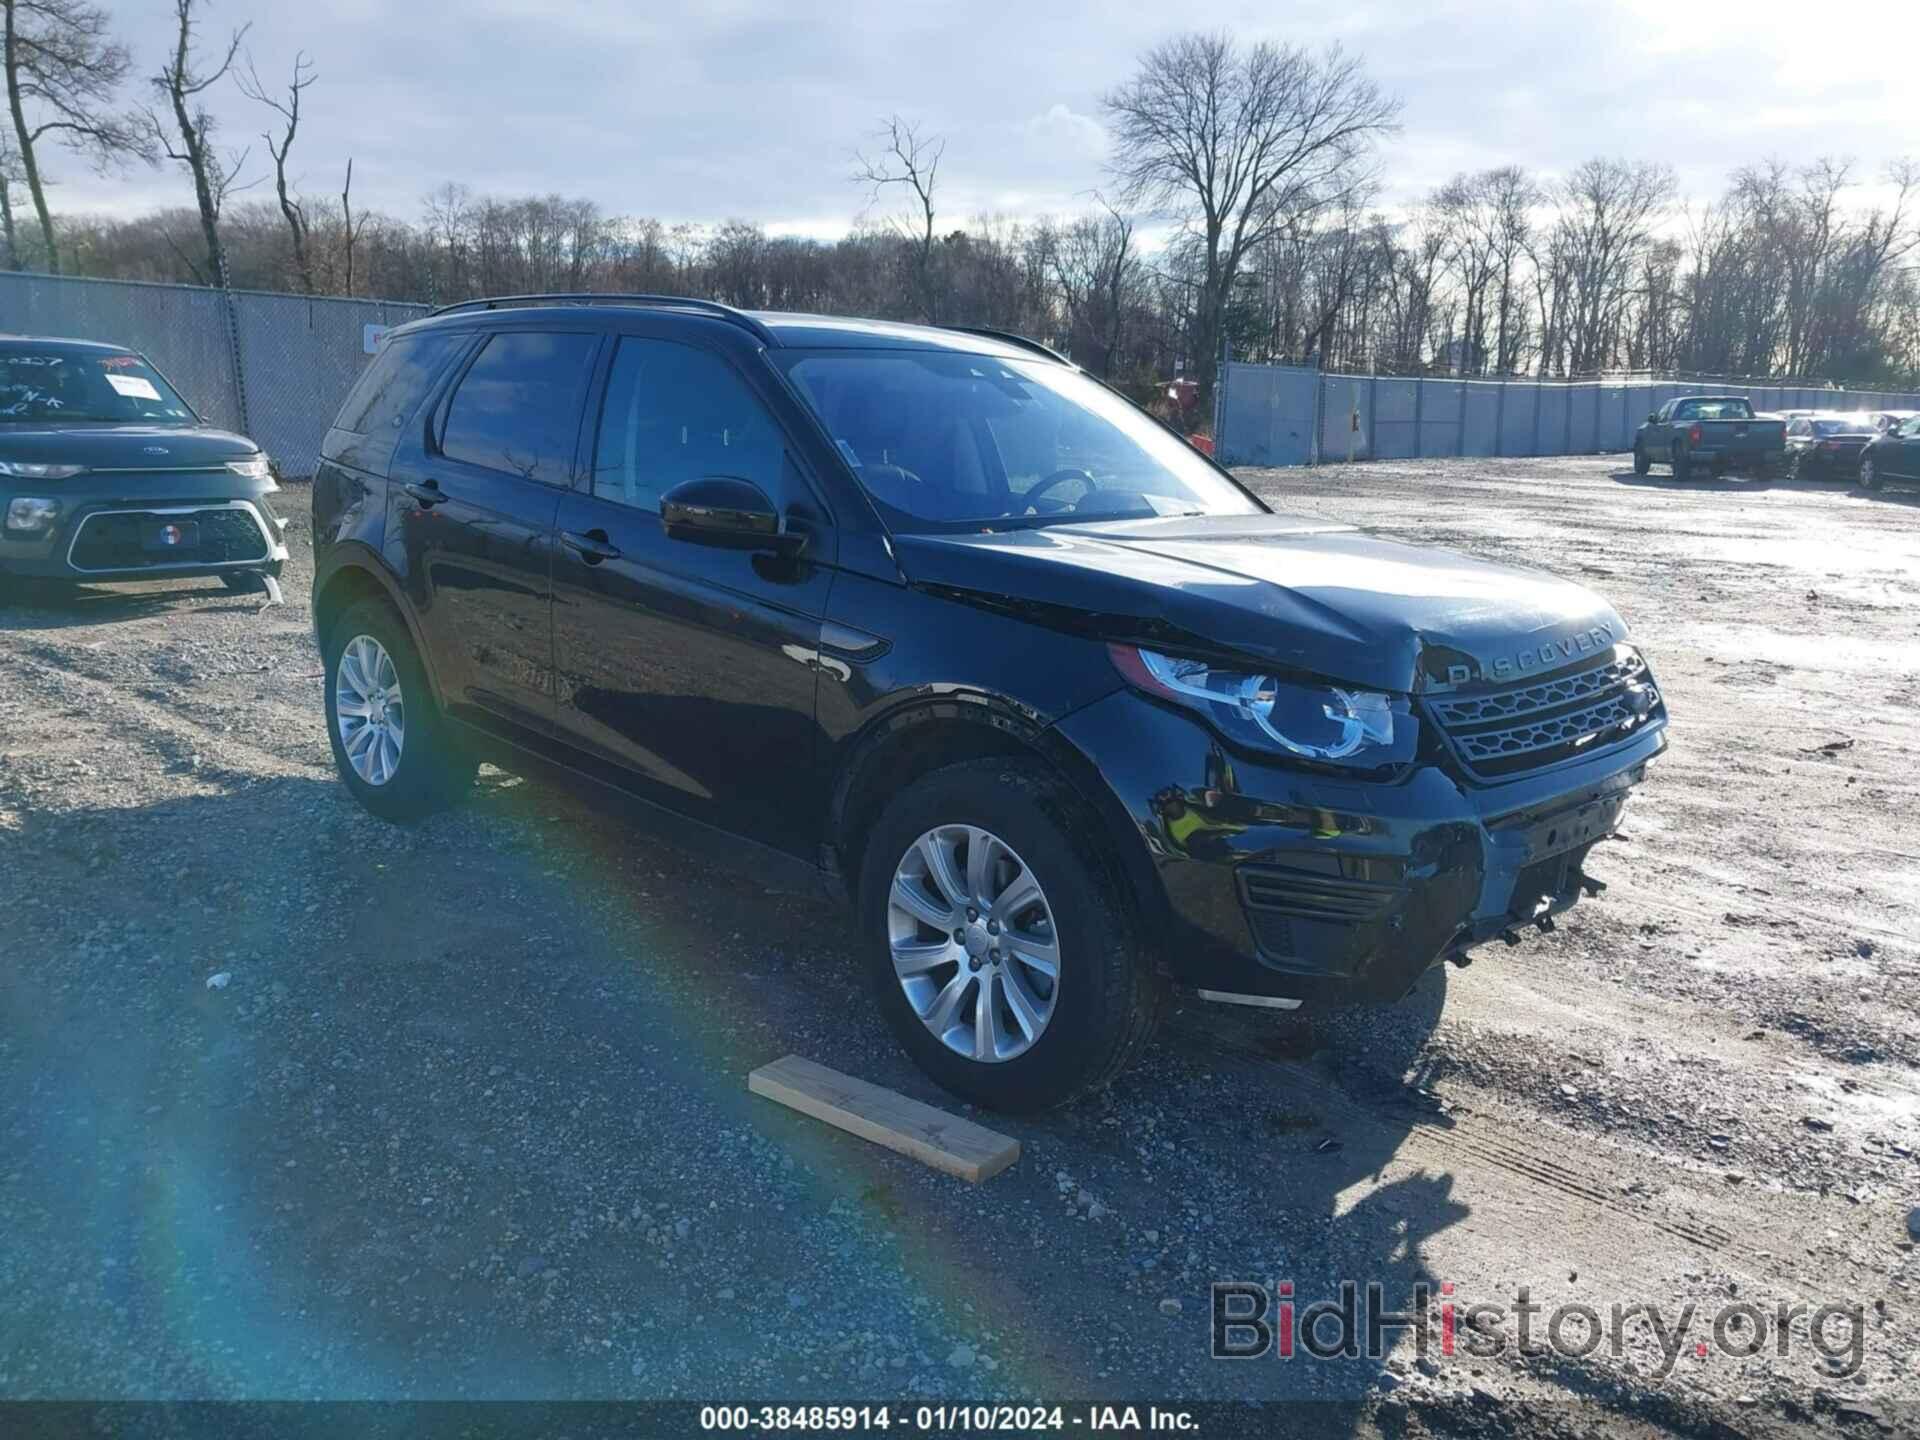 Фотография SALCP2RX9JH731400 - LAND ROVER DISCOVERY SPORT 2018